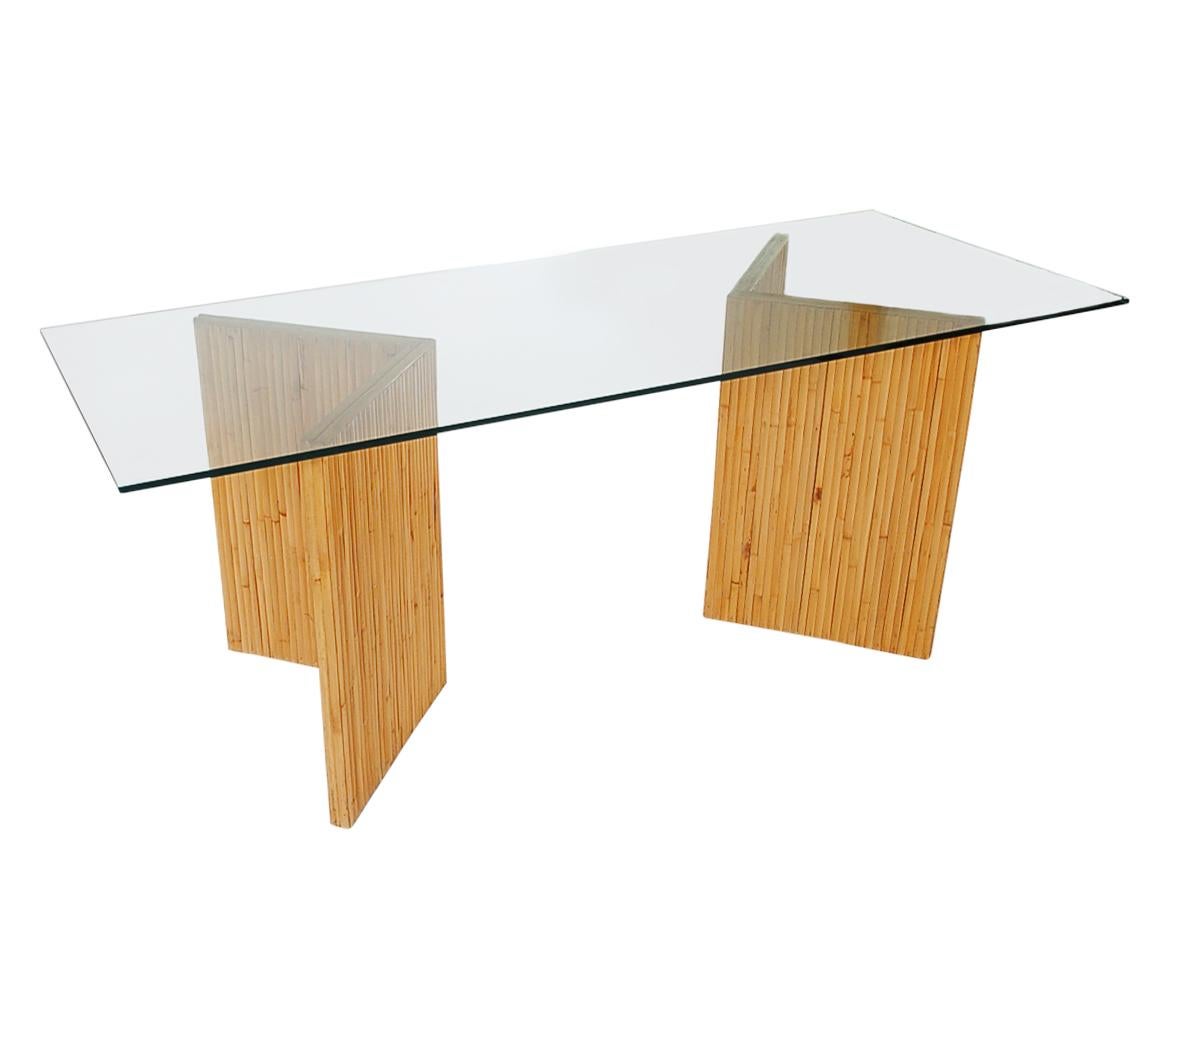 Late 20th Century Mid-Century Modern Bamboo Reed Console Table, Sofa Table or Desk with Glass Top